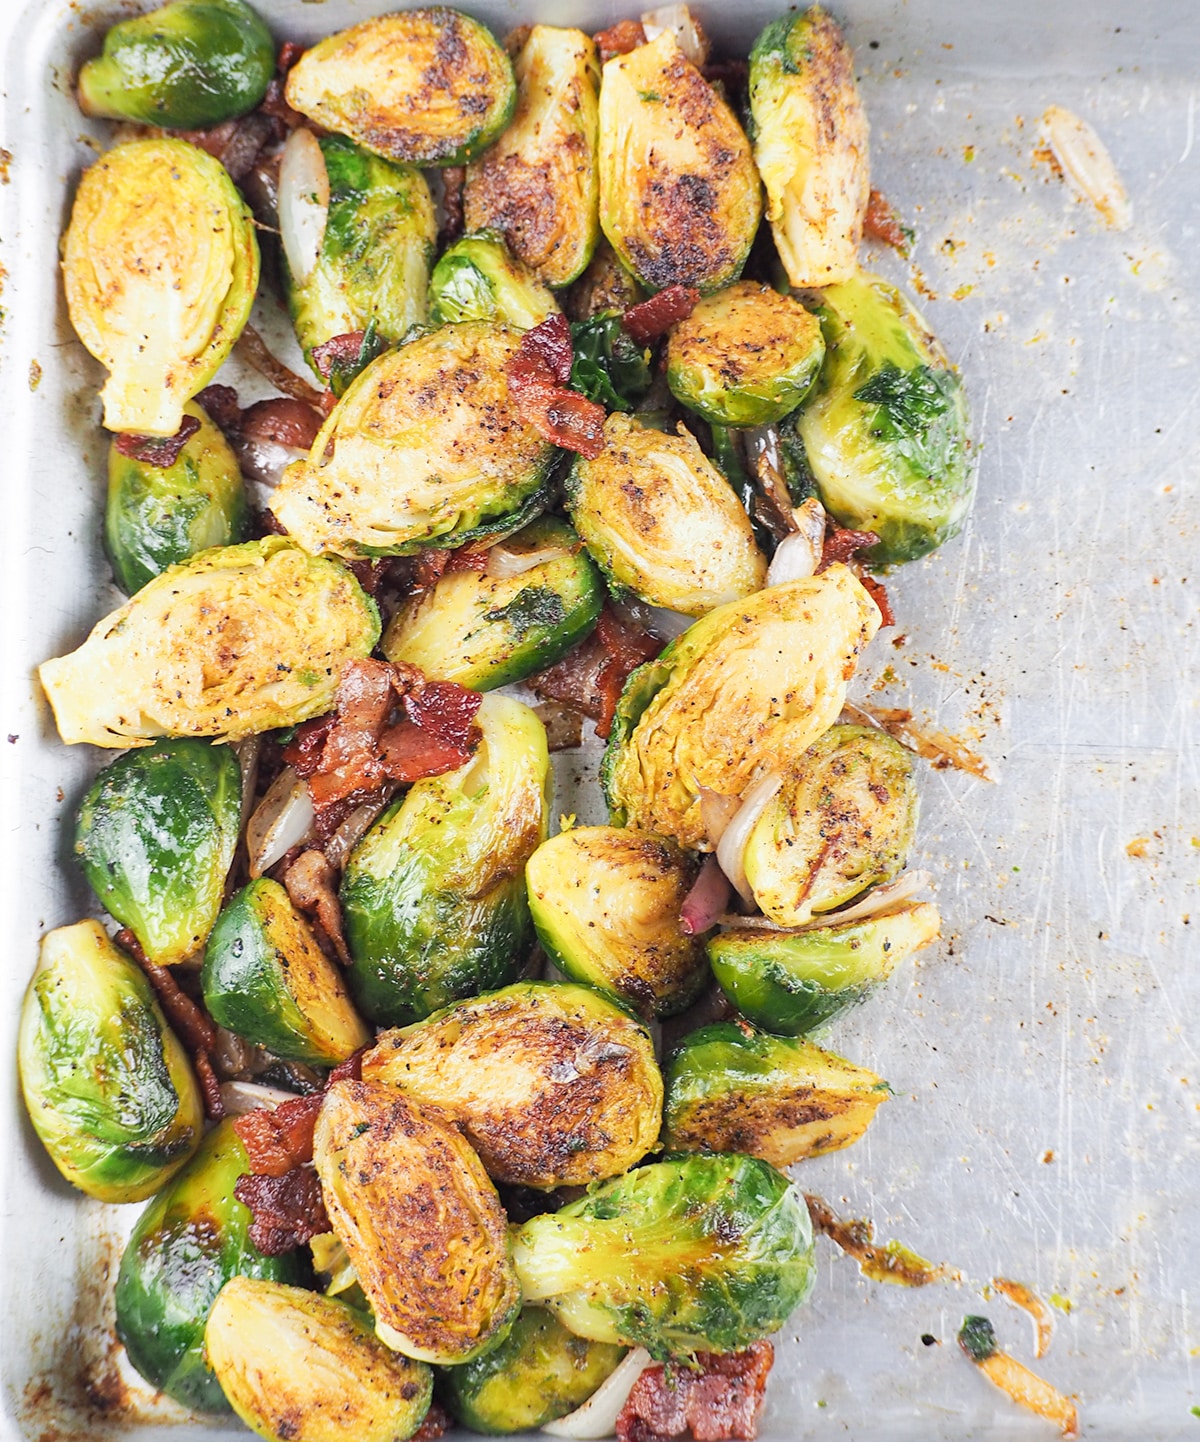 brussel sproutw with bacon on baking tray